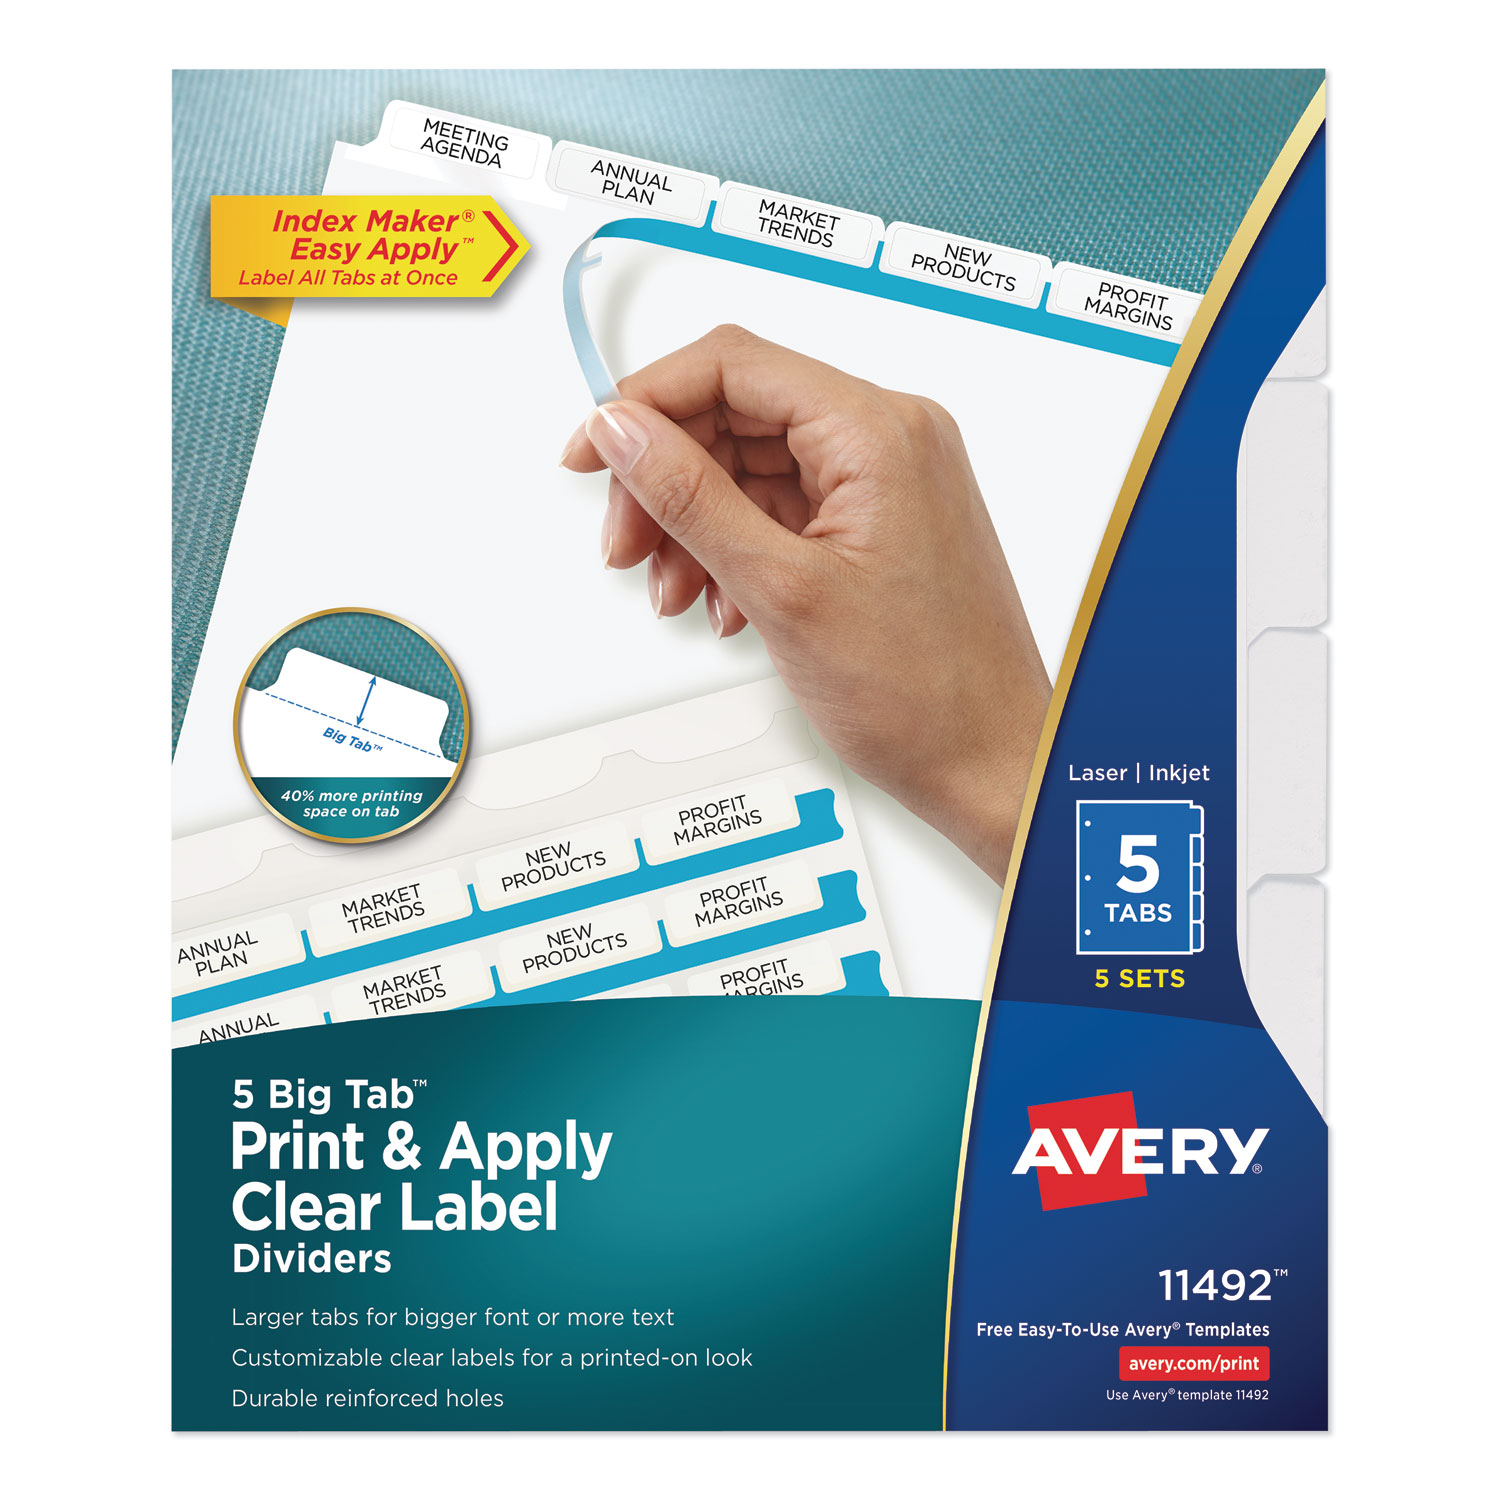  Avery 11492 Print and Apply Index Maker Clear Label Dividers, 5 White Tabs, Letter, 5 Sets (AVE11492) 